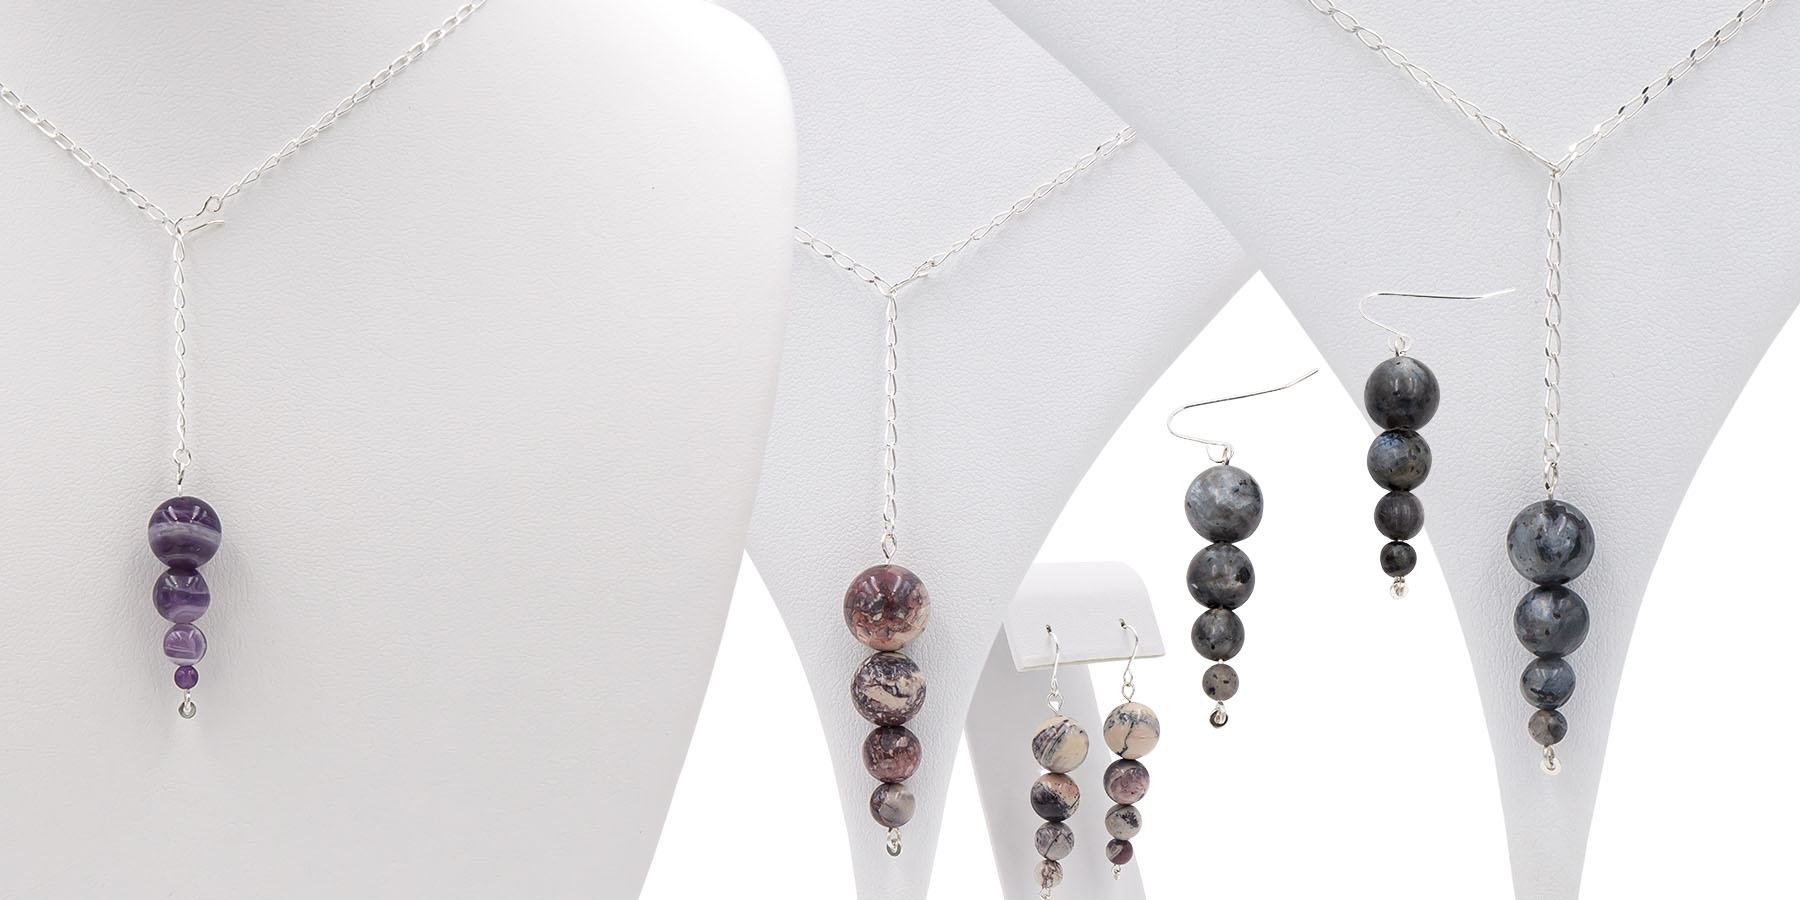 NY Fashion Week Earth Song Jewelry New Pendulum Necklace Earring Collection